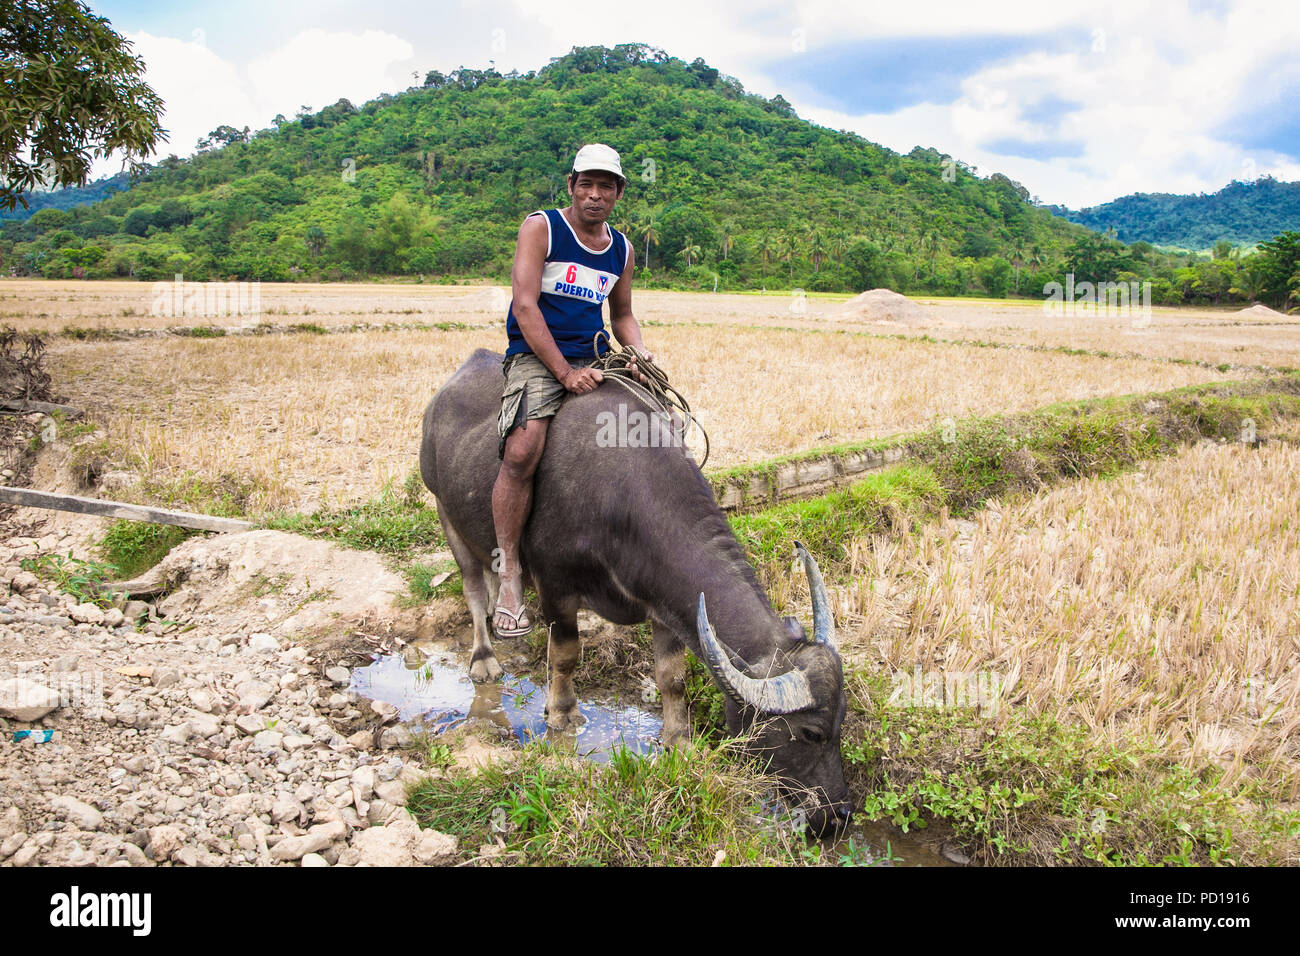 PALAWAN, PHILIPPINES-MARCH 28. 2016: Philippines ride the Carabao a domesticated subspecies of the water buffalo on March 28, 2016. at Palawan, Philip Stock Photo